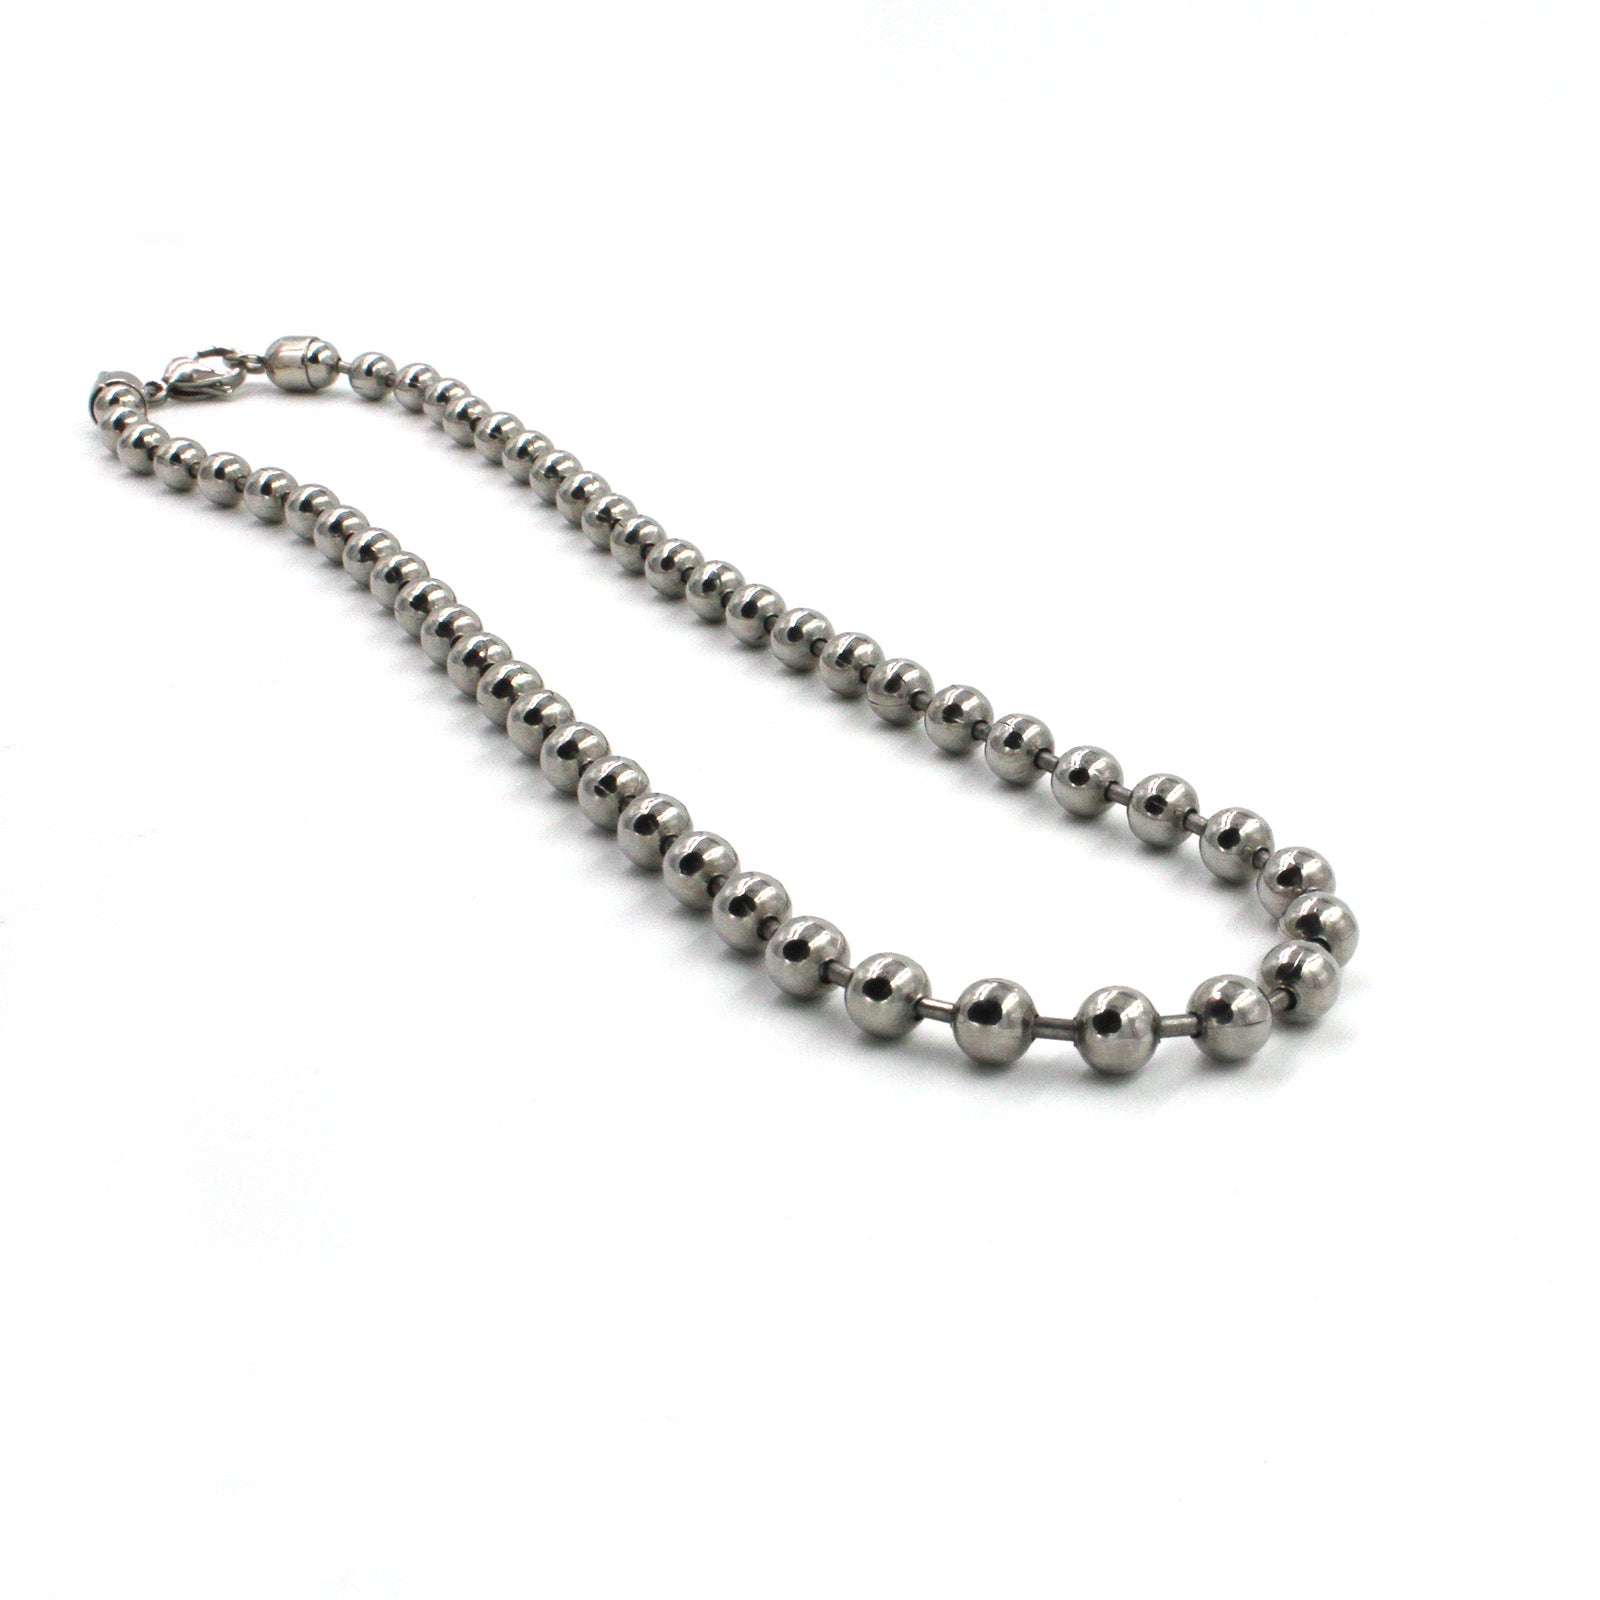 6515-43582sb Stainless Steel Necklace